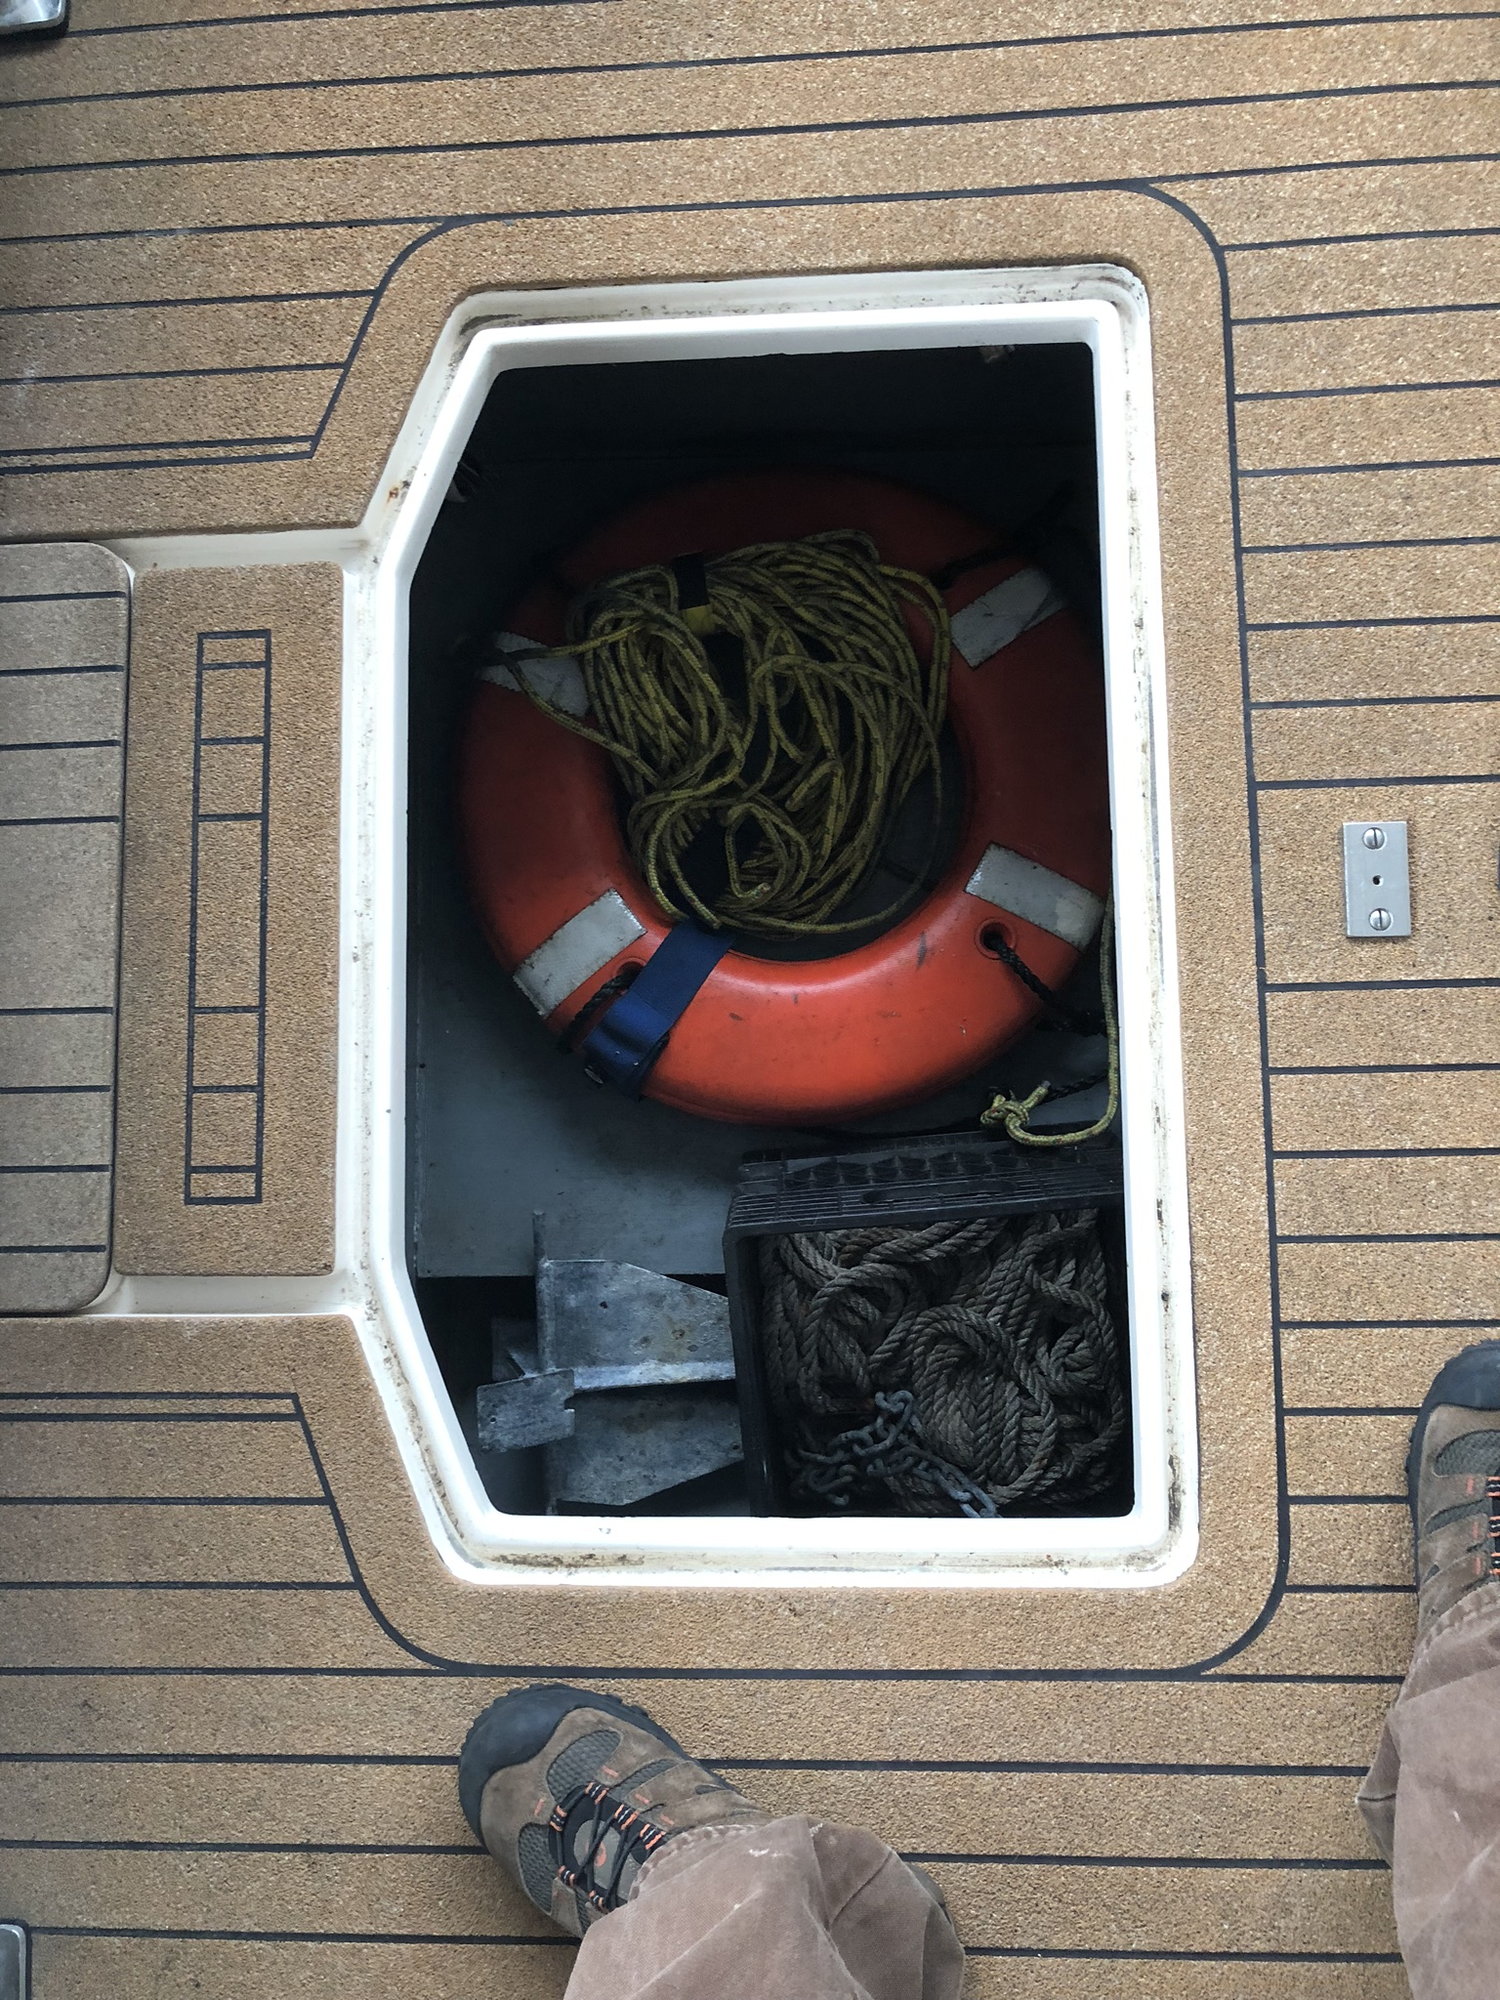 Marine 31 Product Review + 339 Intrepid detail